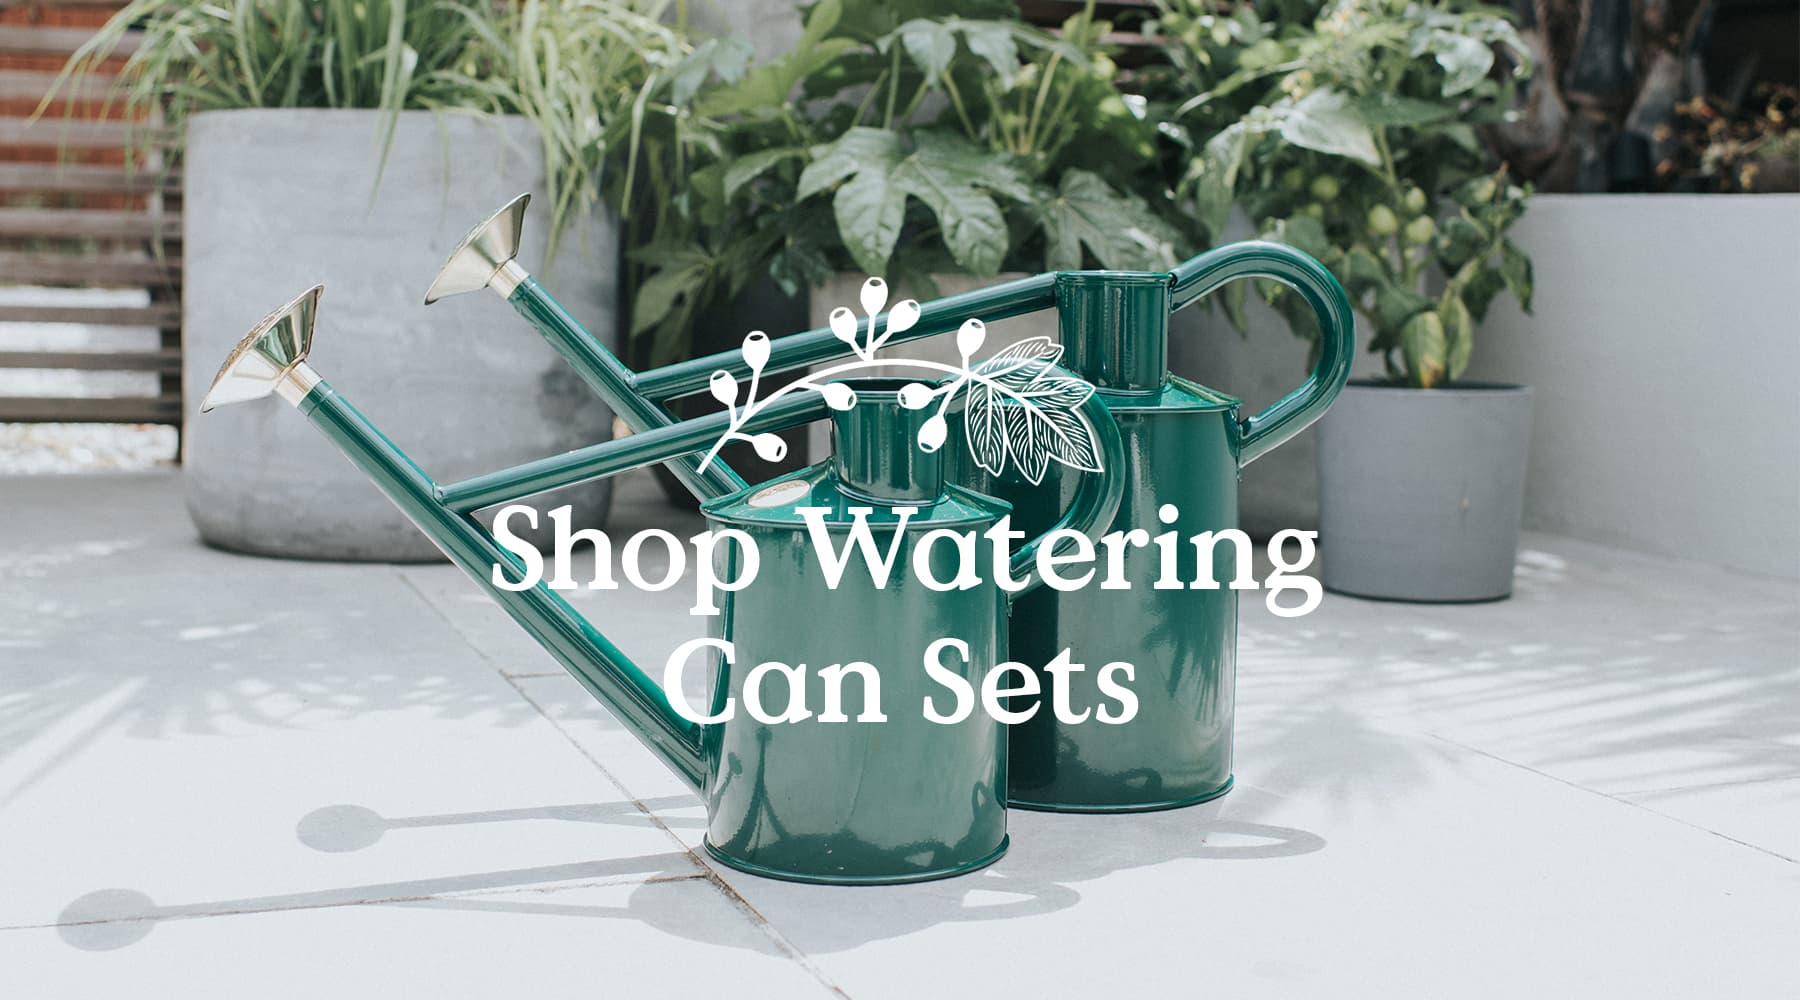 Watering cans sets